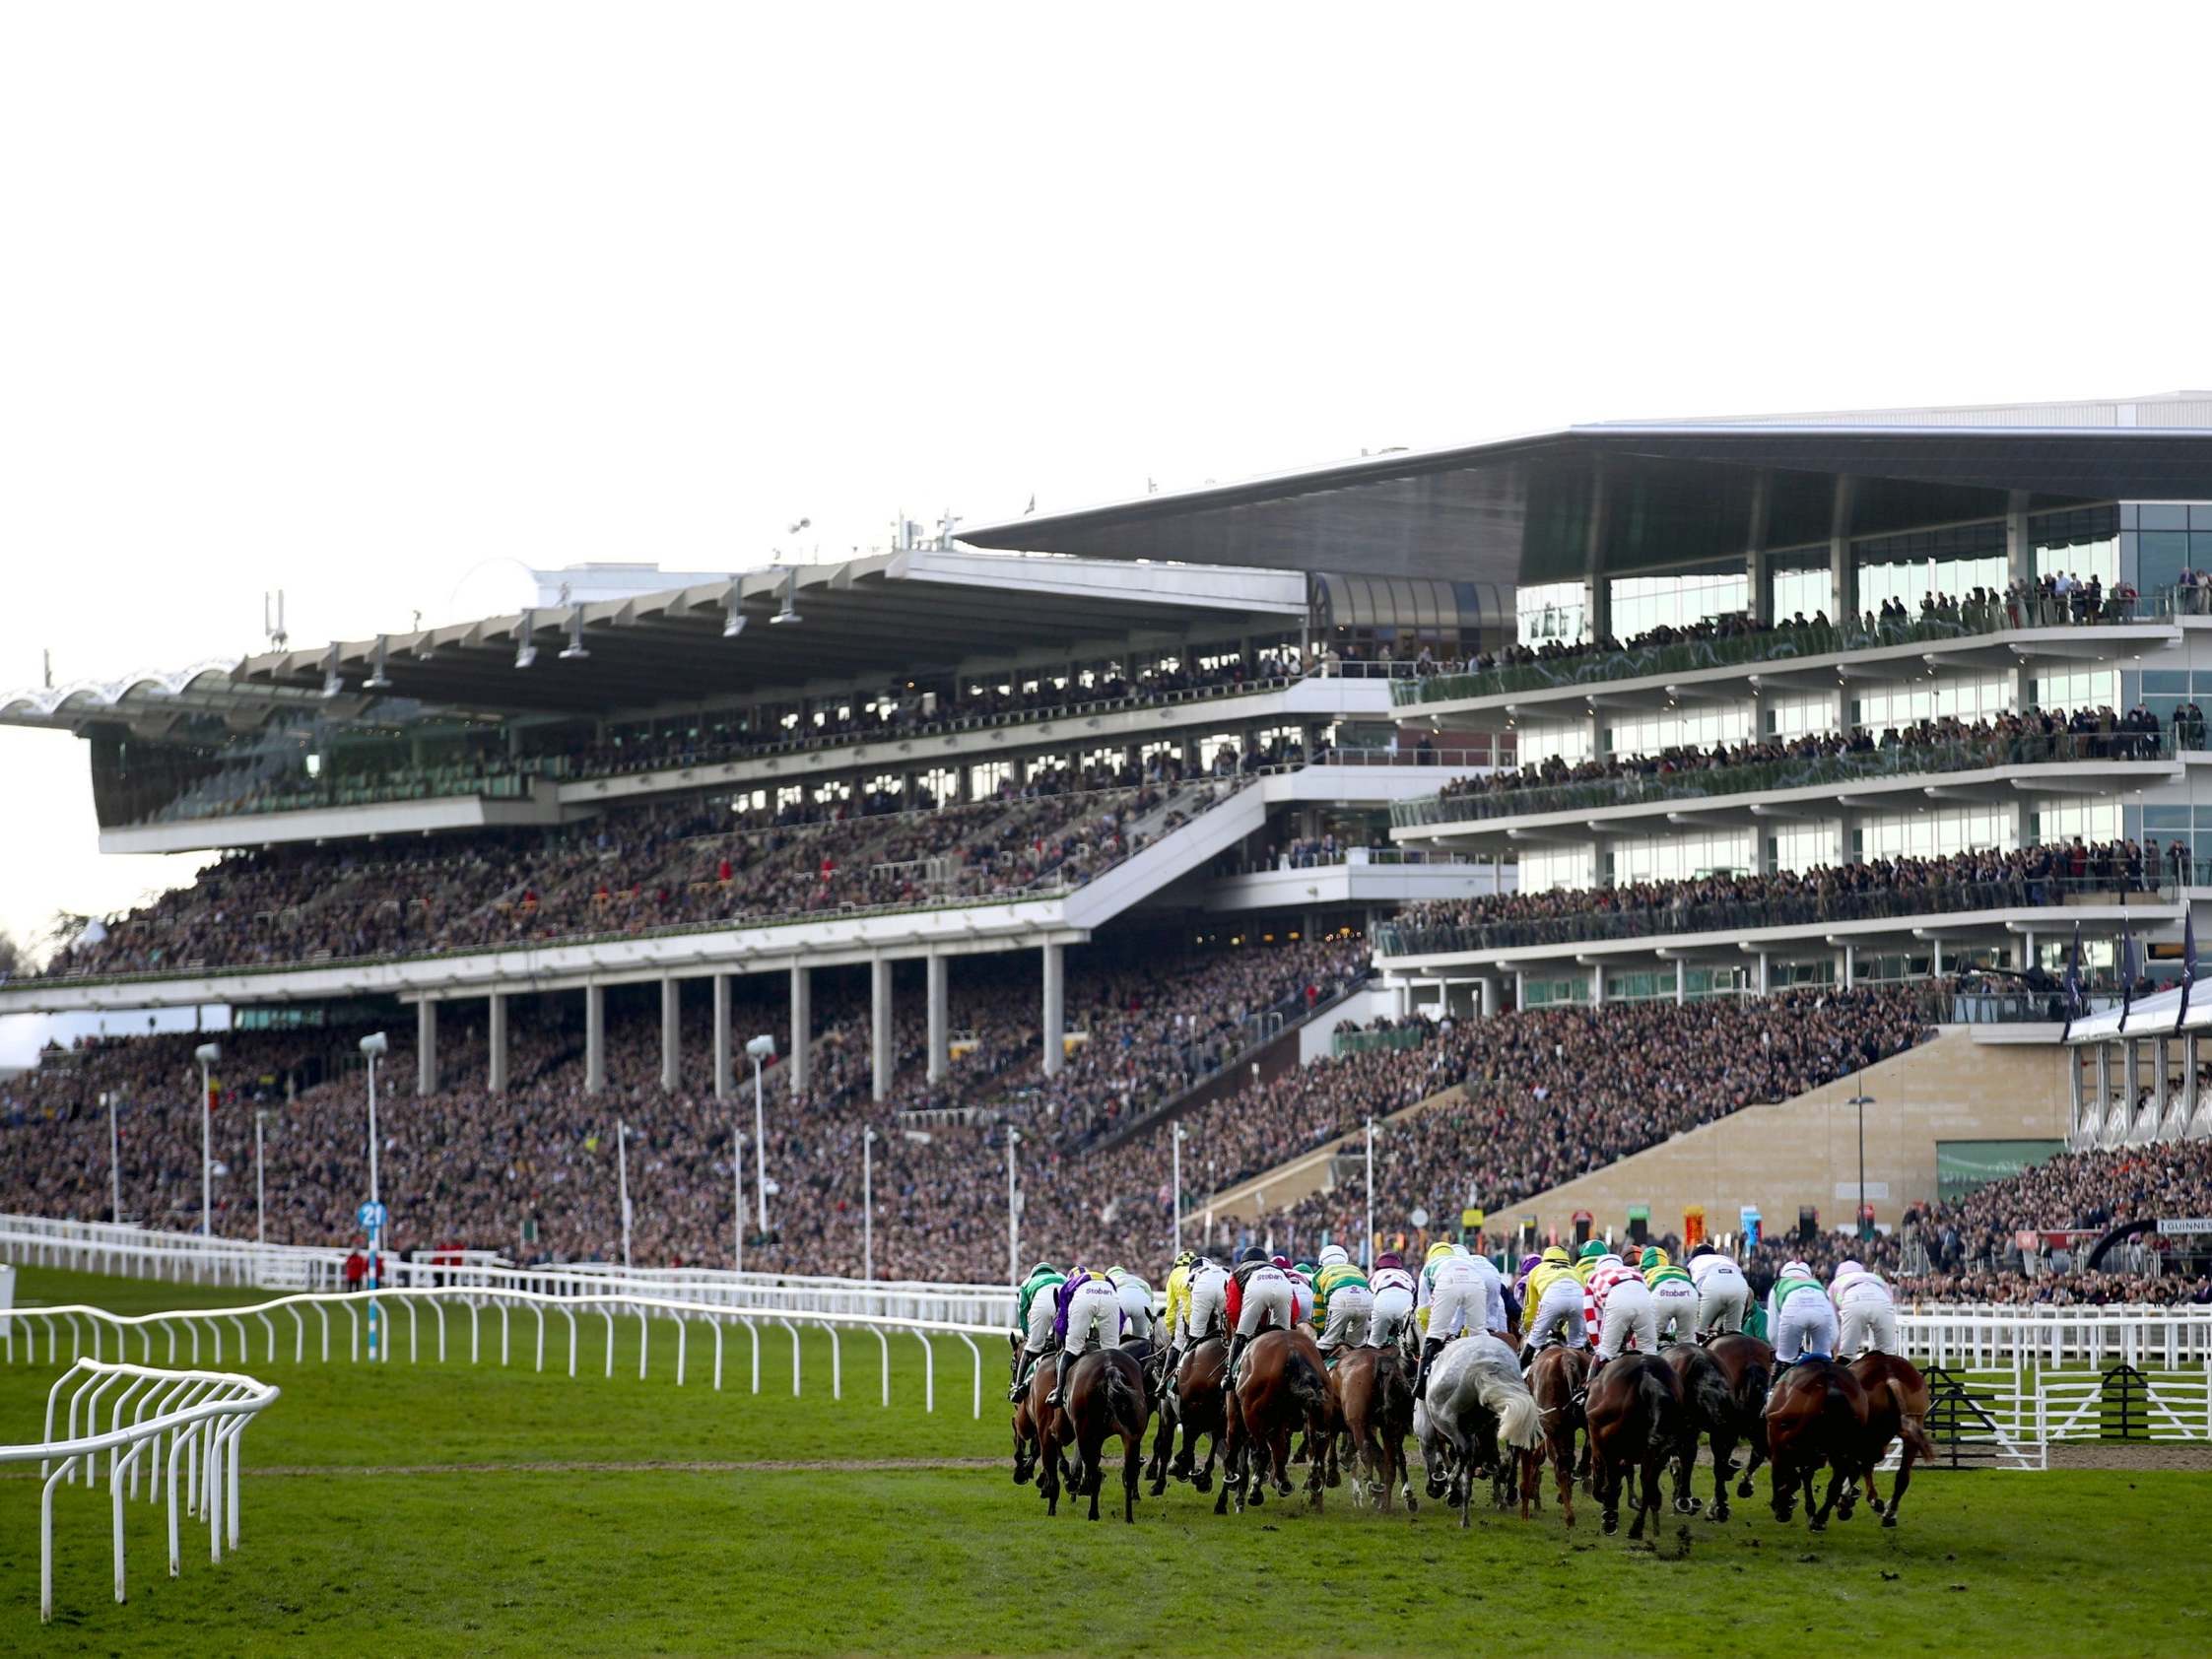 Thousands of spectators watch a race at the Cheltenham Festival in mid-March